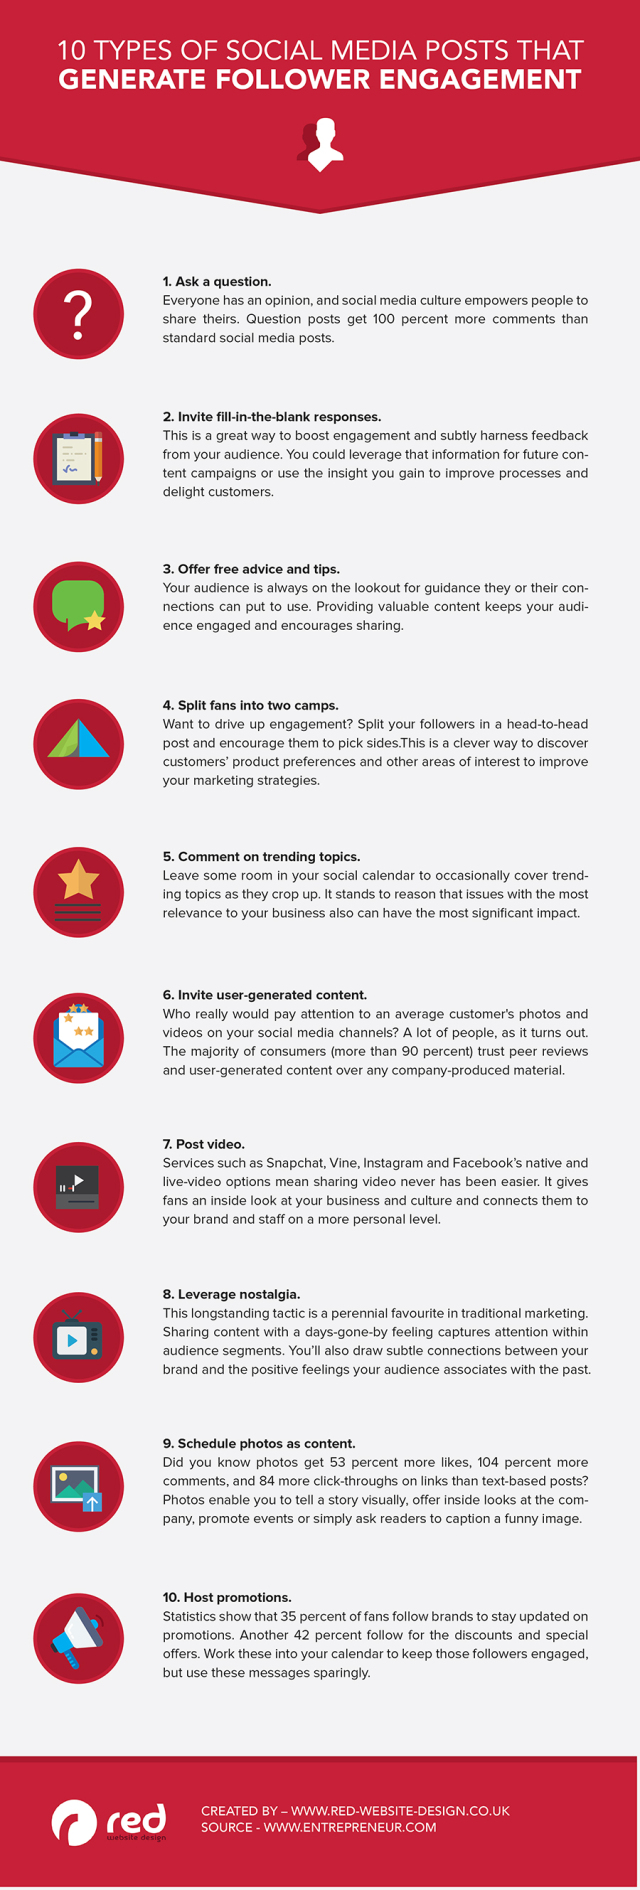 10-types-of-social-media-posts-that-generate-engagement-with-followers1